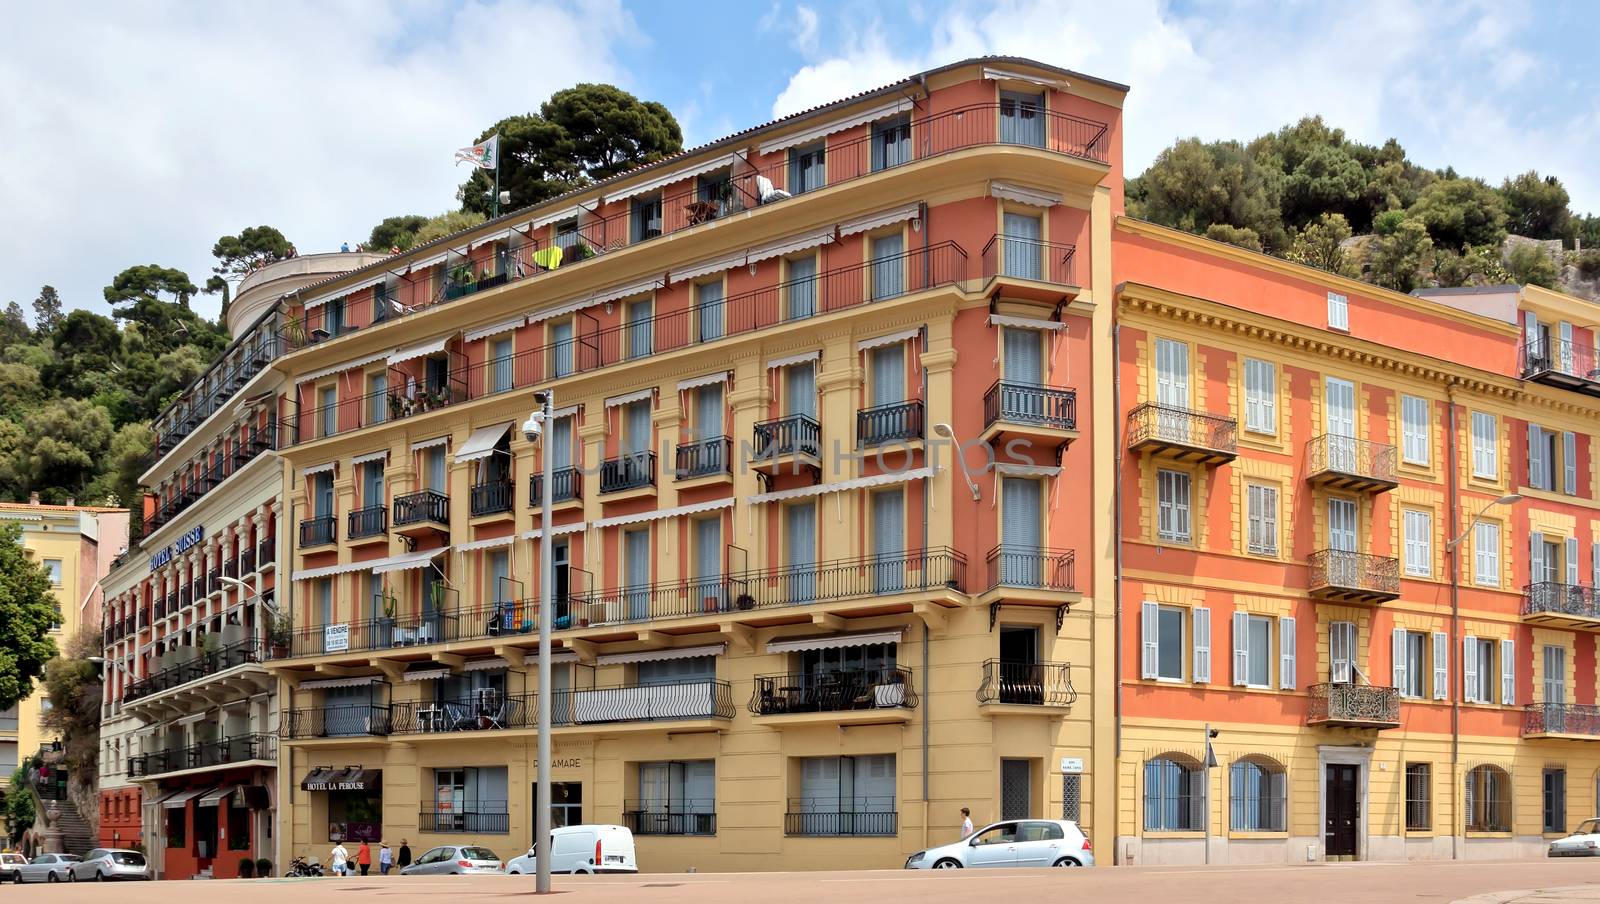 NICE, FRANCE - MAY 31: Architecture along Promenade des Anglais on May 31, 2014 in Nice, France. Promenade is a symbol of the Cote d'Azur and was built in 1830 at the expense of the British colony.

Nice, France - May 31, 2014: Architecture along Promenade des Anglais. Promenade des Anglais is a symbol of the Cote d'Azur and was built in 1830 at the expense of the British colony. People are walking by street.